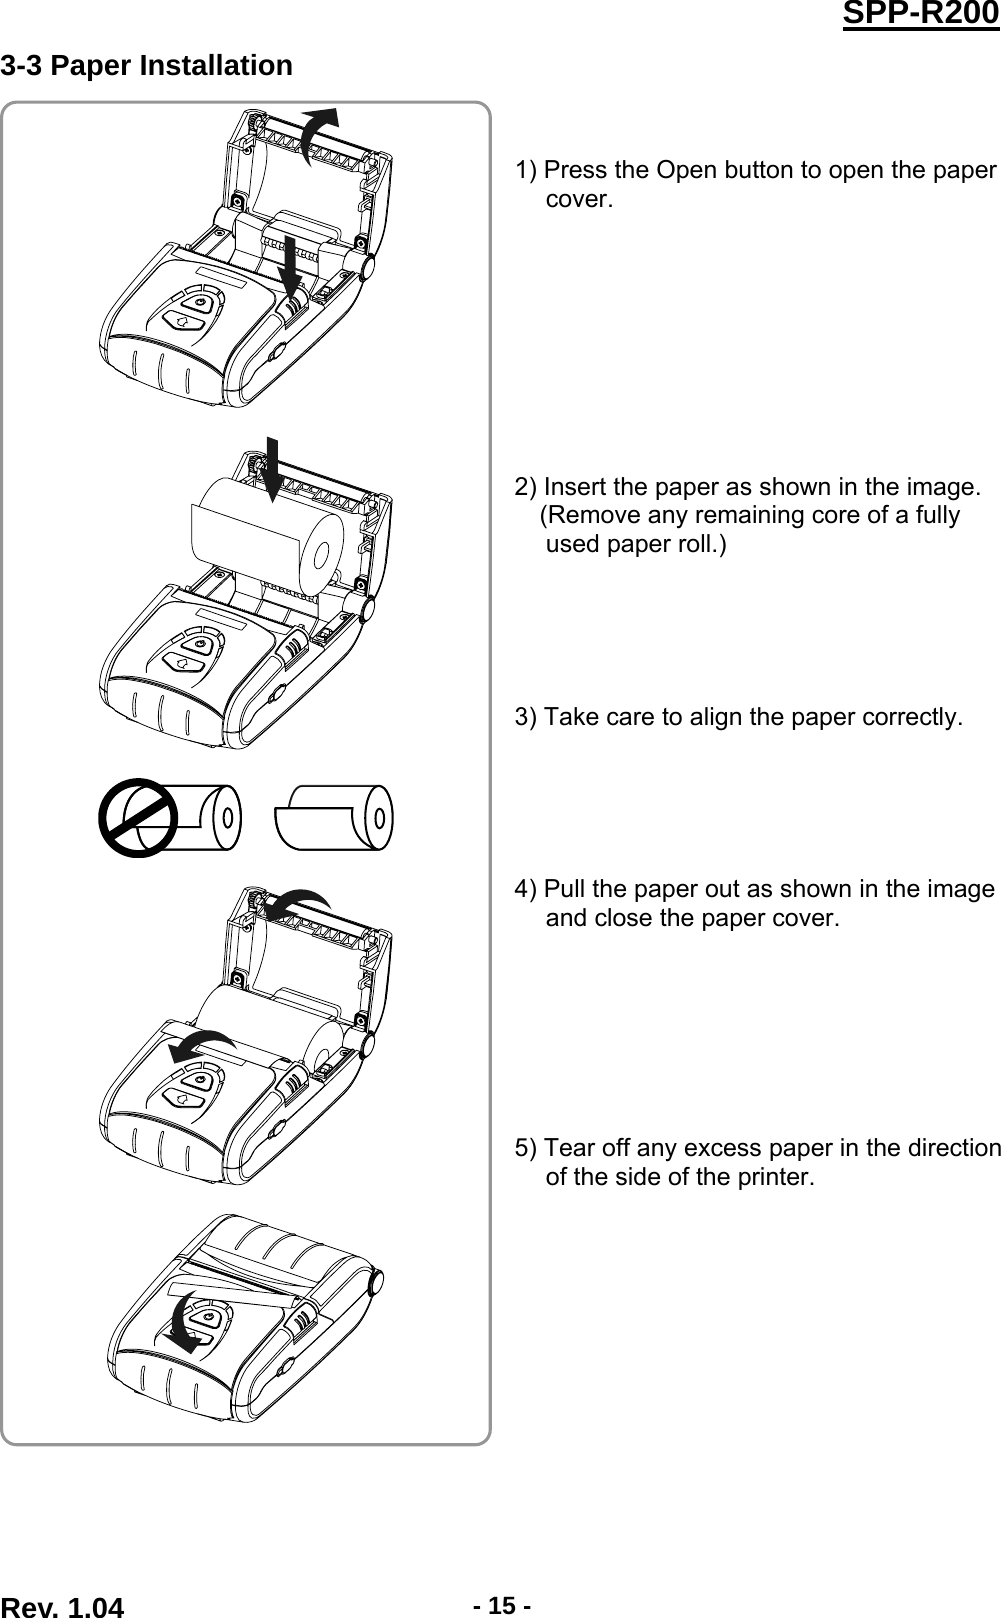  Rev. 1.04  - 15 -SPP-R2003-3 Paper Installation   1) Press the Open button to open the paper cover.          2) Insert the paper as shown in the image. (Remove any remaining core of a fully used paper roll.)      3) Take care to align the paper correctly.      4) Pull the paper out as shown in the image and close the paper cover.        5) Tear off any excess paper in the direction of the side of the printer.          